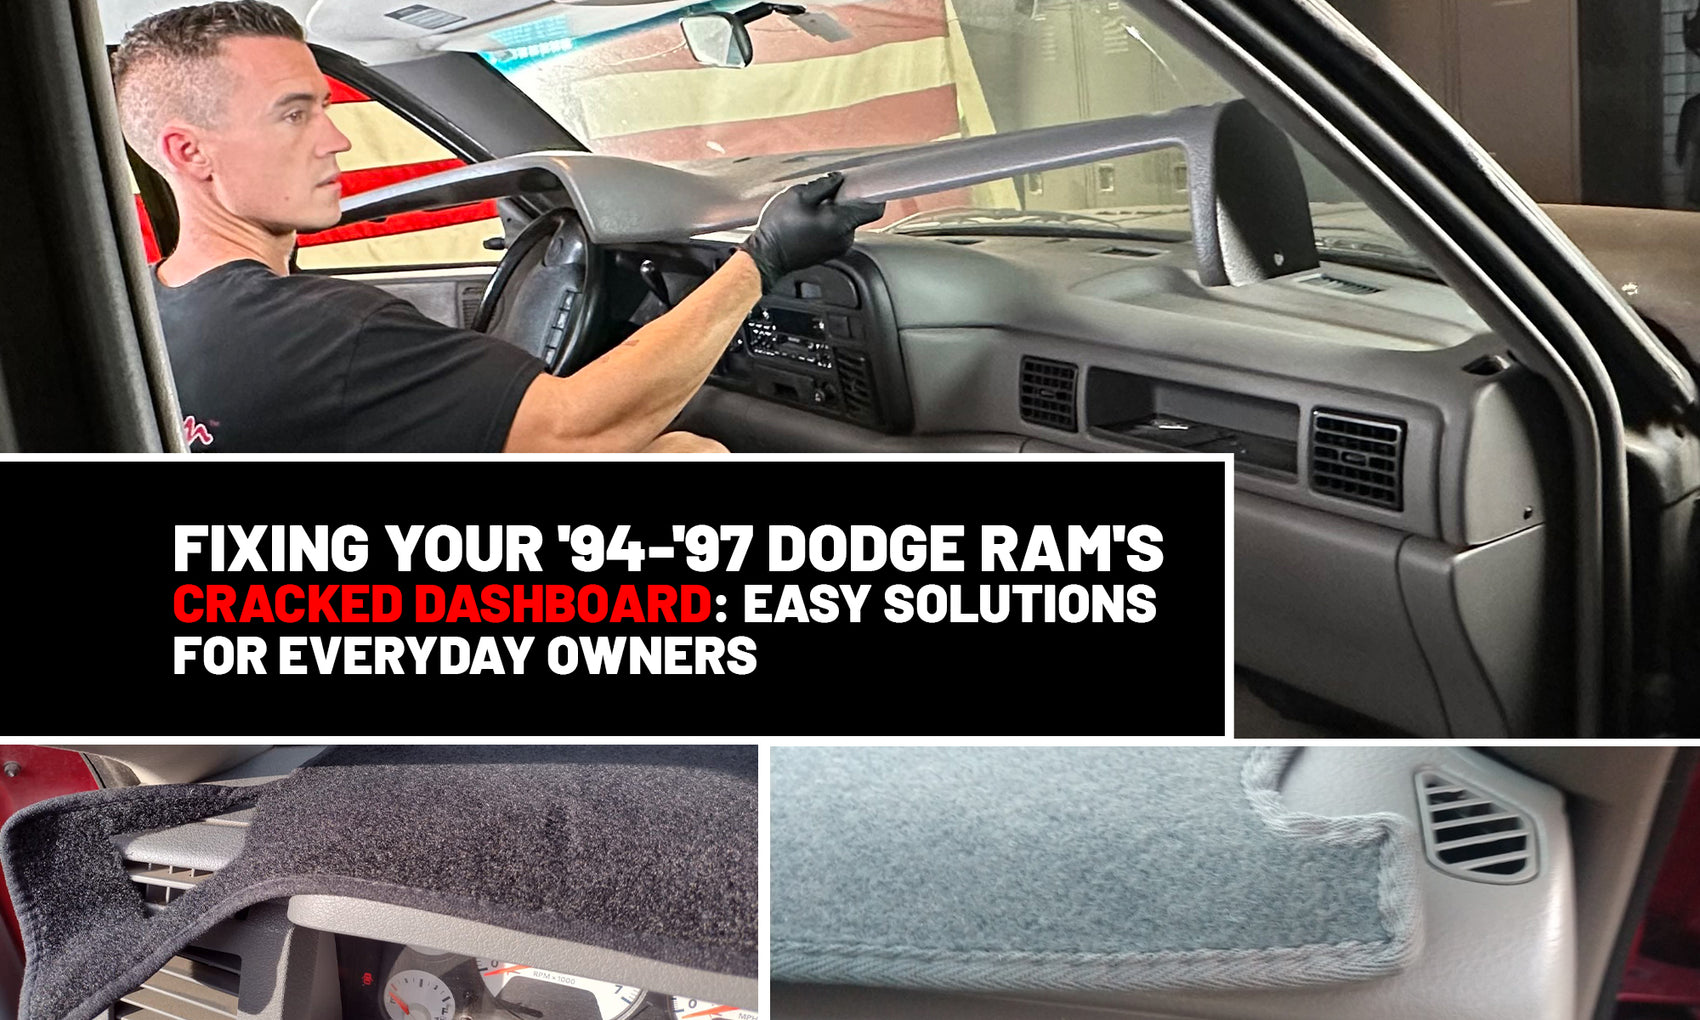 Fixing Your '94-'97 Dodge Ram's Cracked Dashboard: Easy Solutions for Everyday Owners